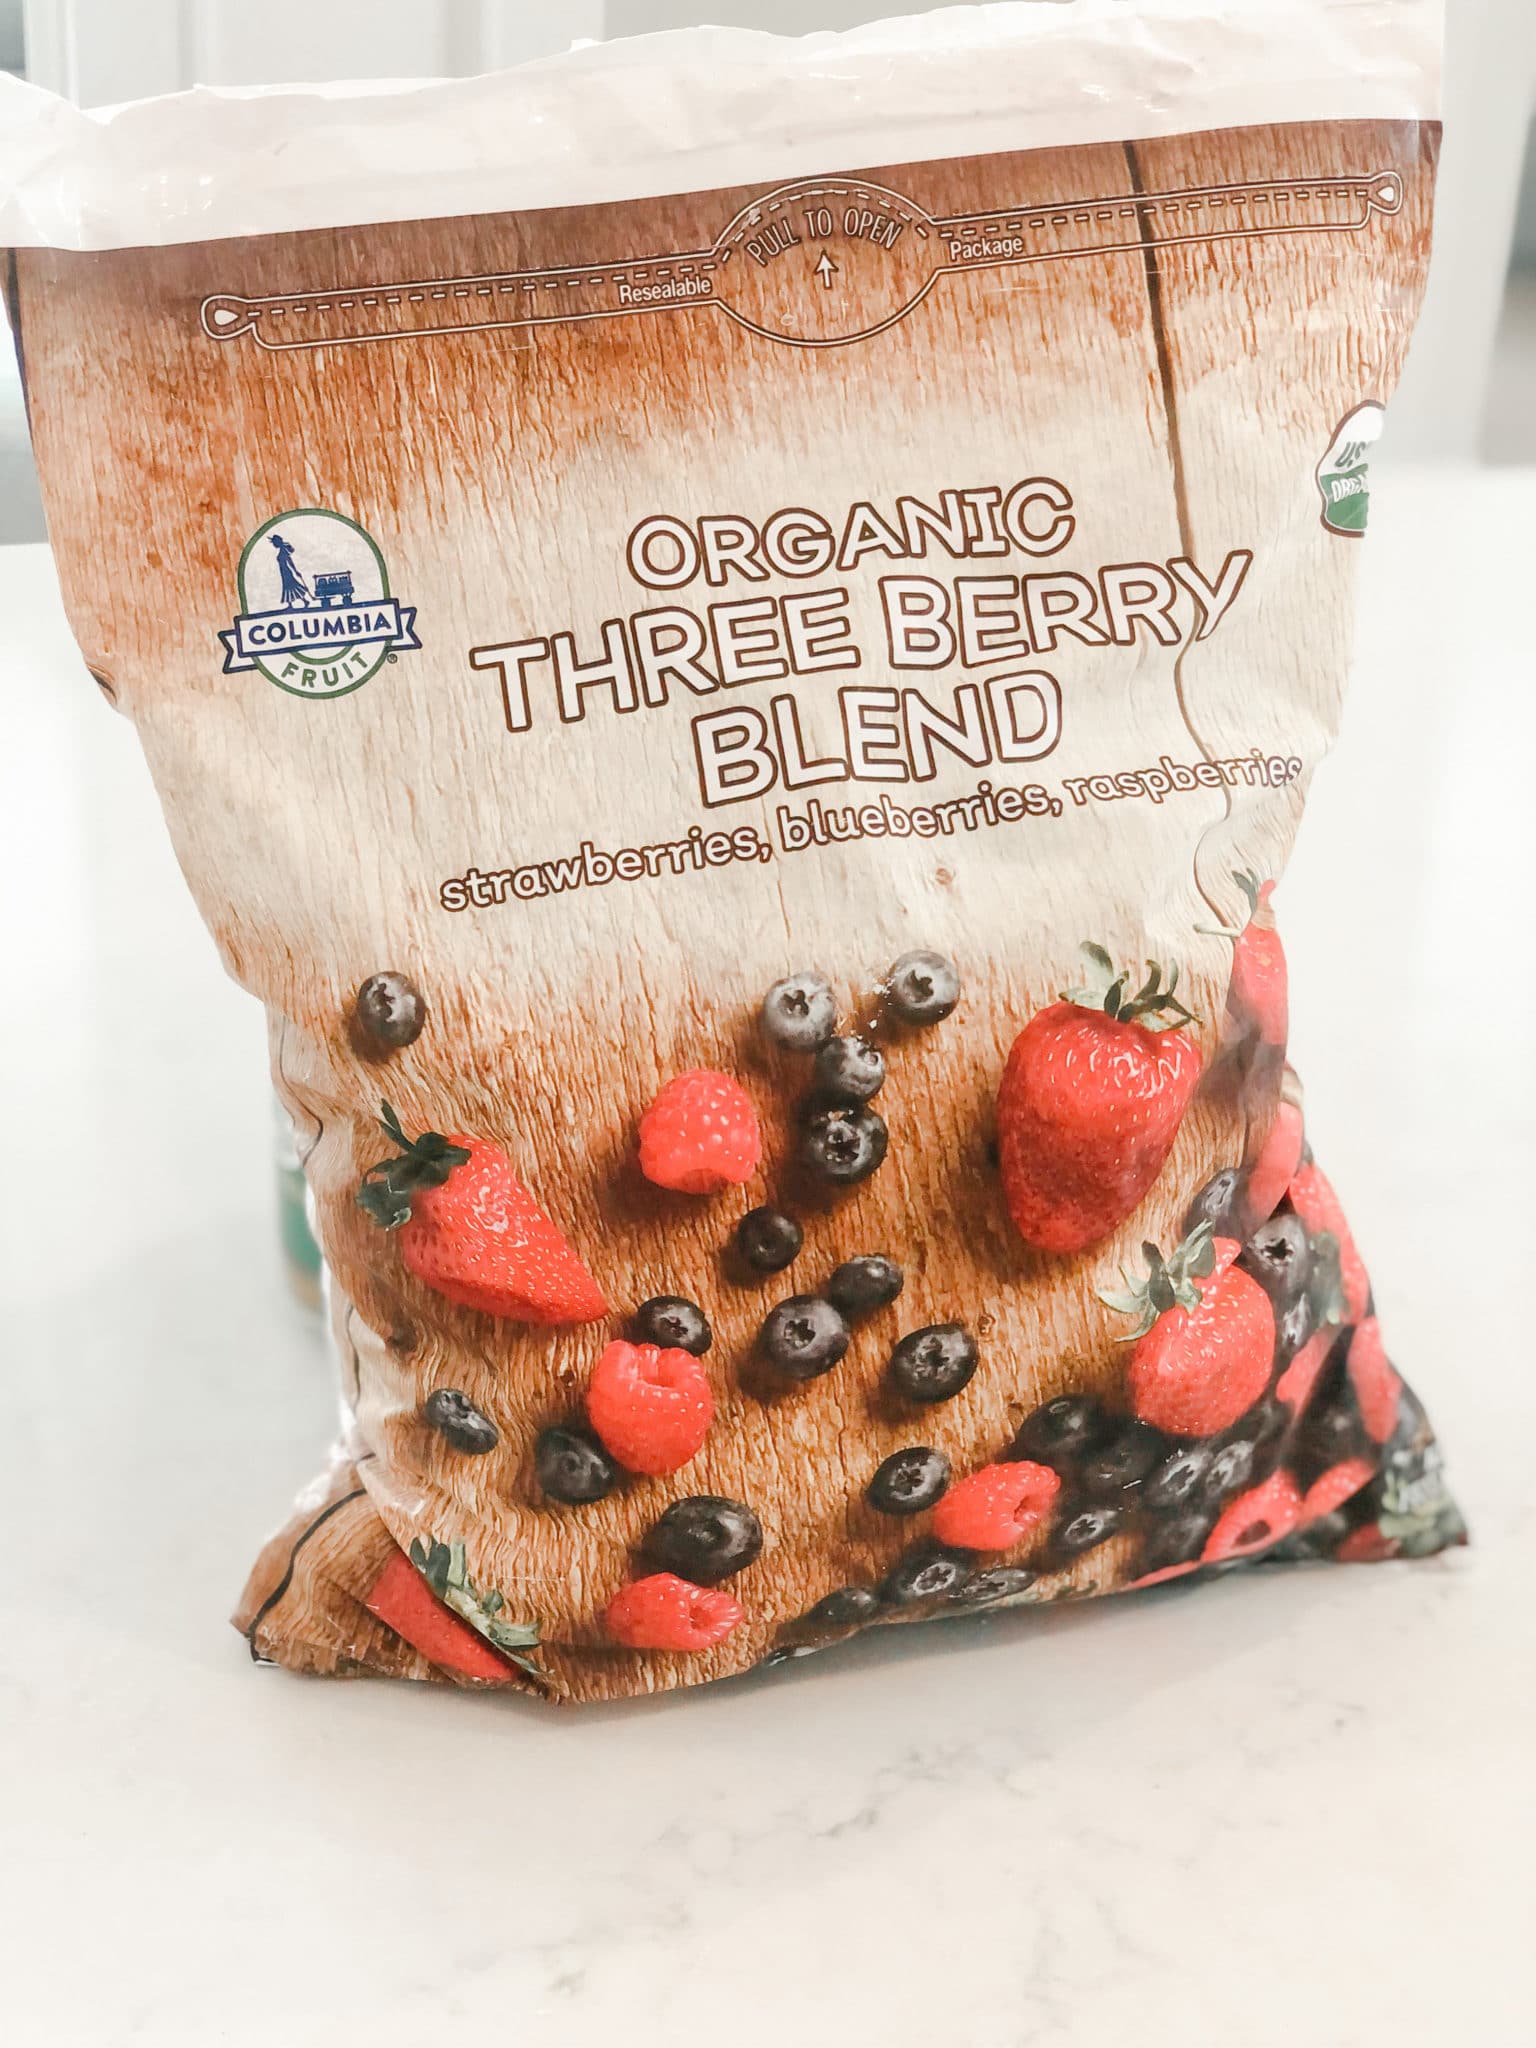 Photo of Organic Three Berry Blend from Costco